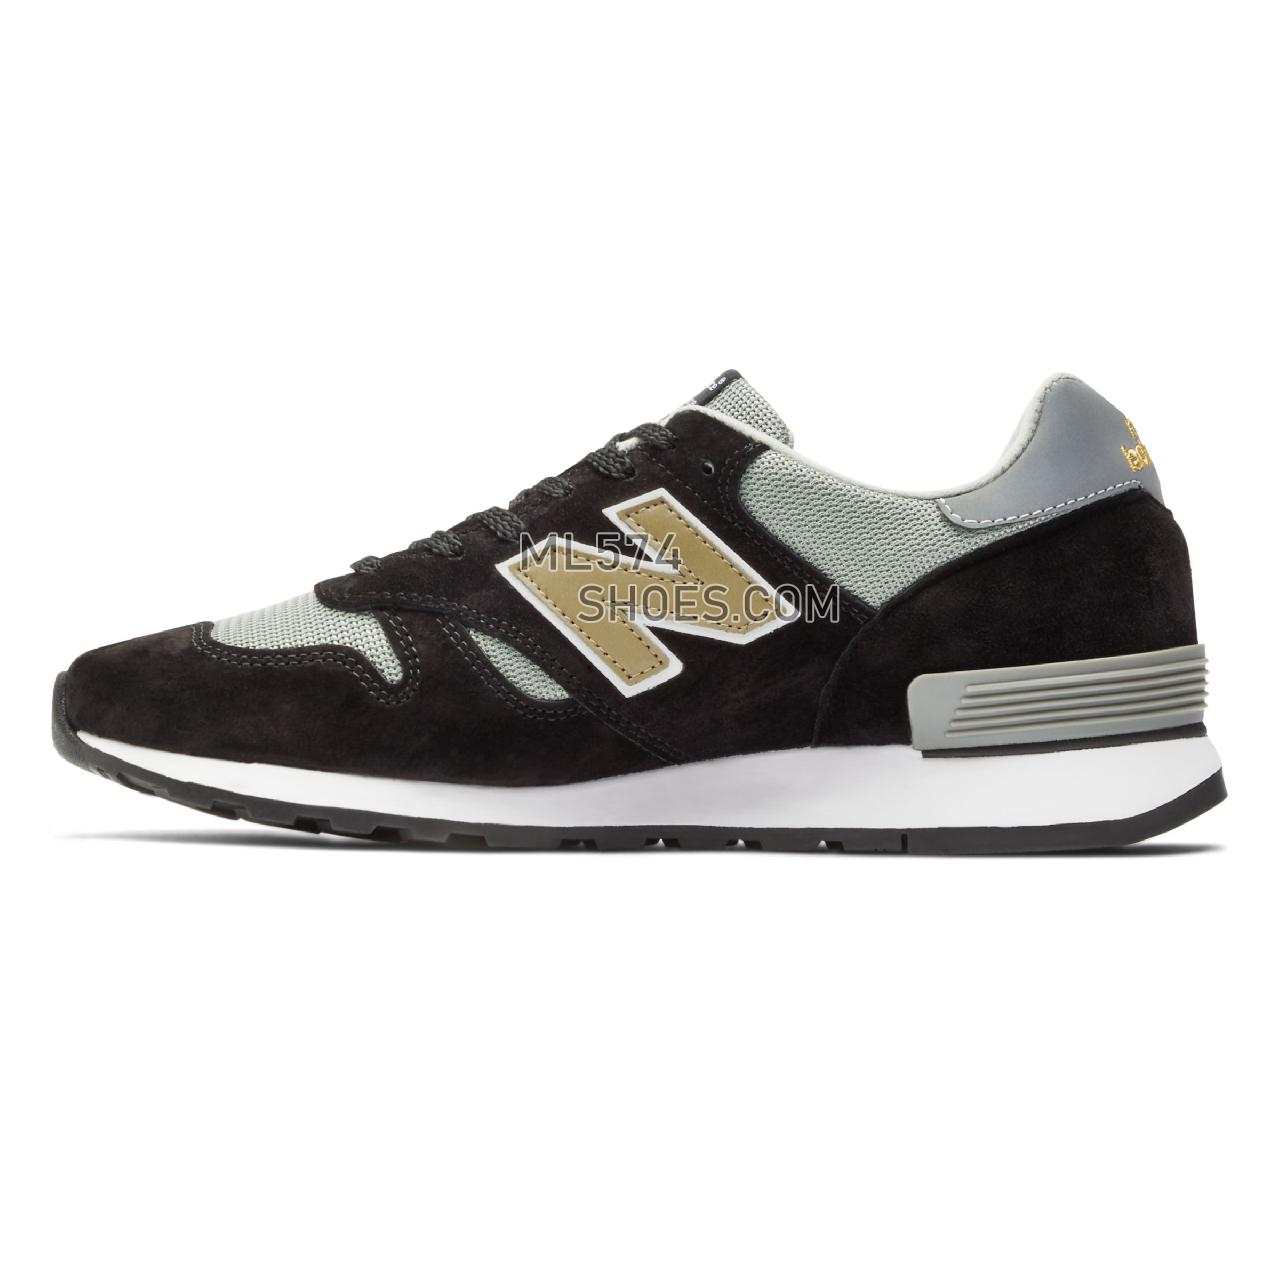 New Balance MADE in UK 670 - Men's Made in USA And UK Sneakers - black grey gold - M670KGW